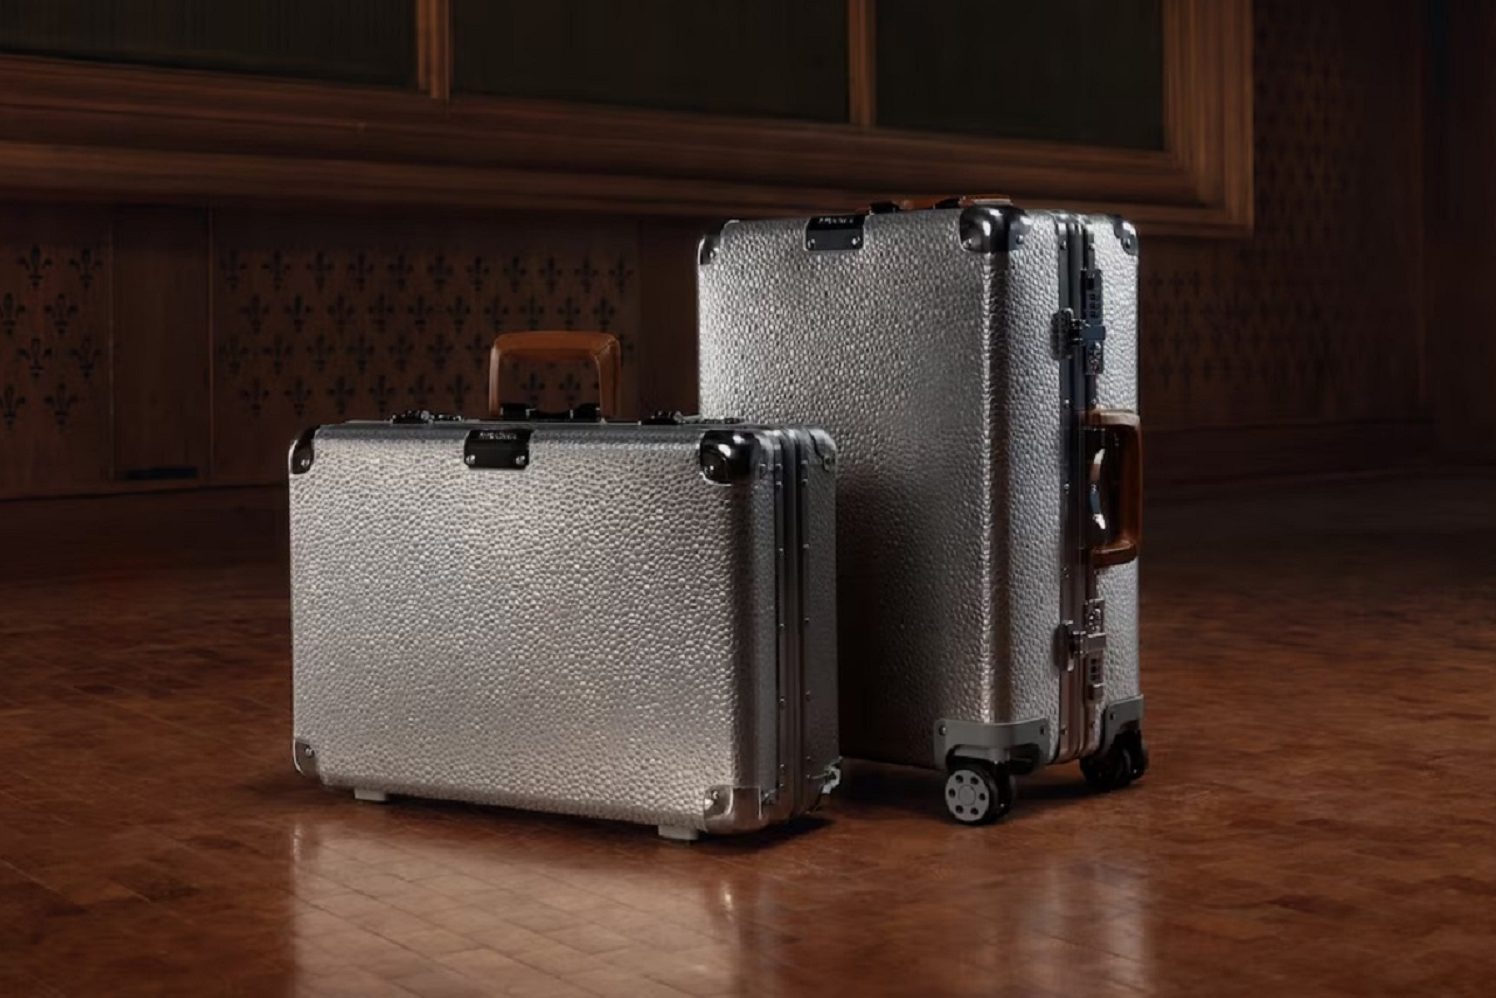 The Rimowa Hammerschlag collection.